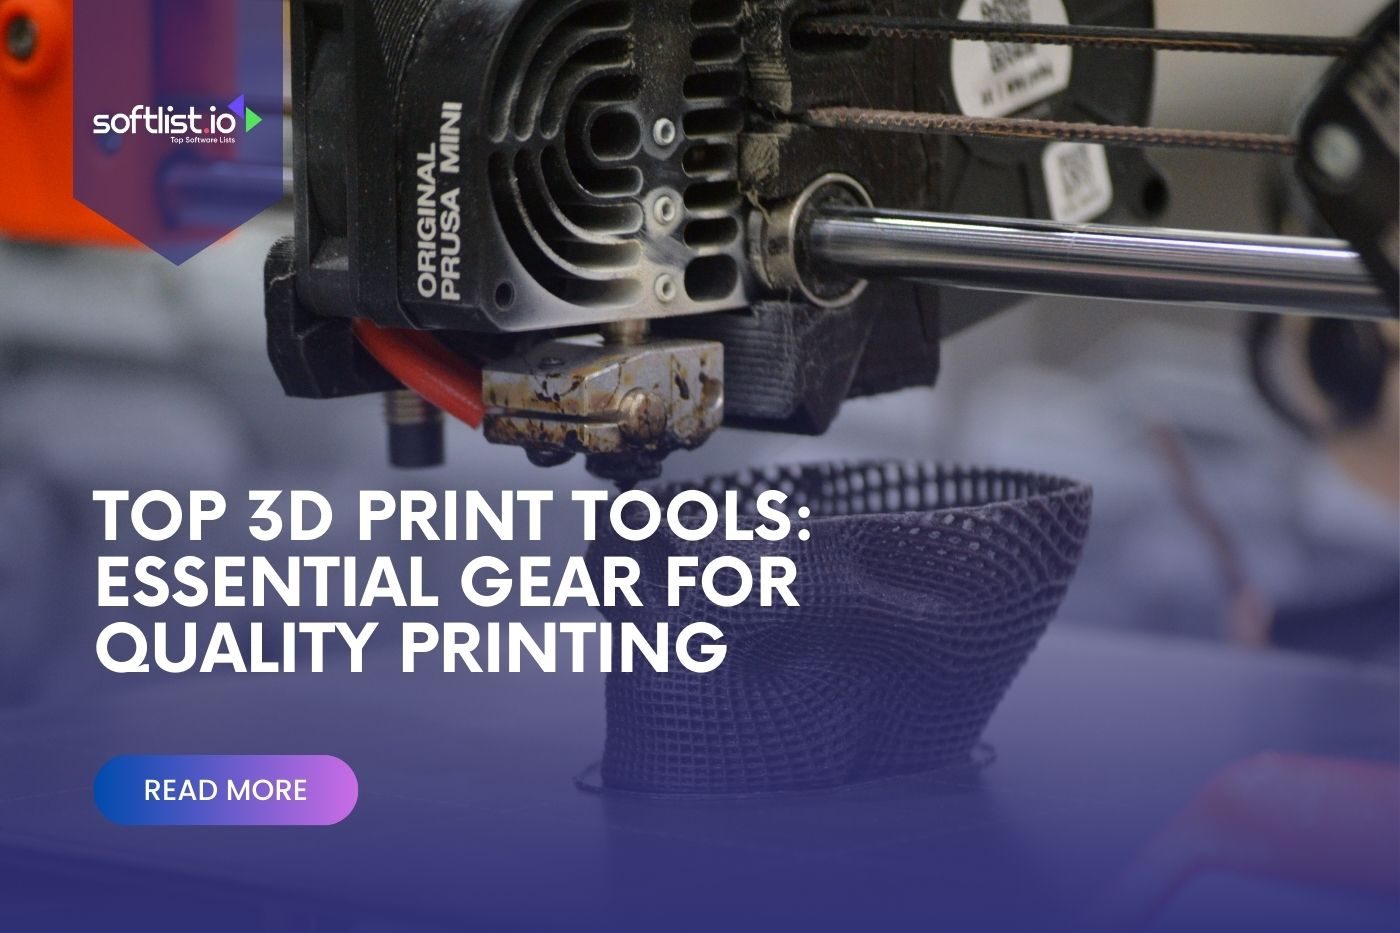 Top 3D Print Tools Essential Gear for Quality Printing